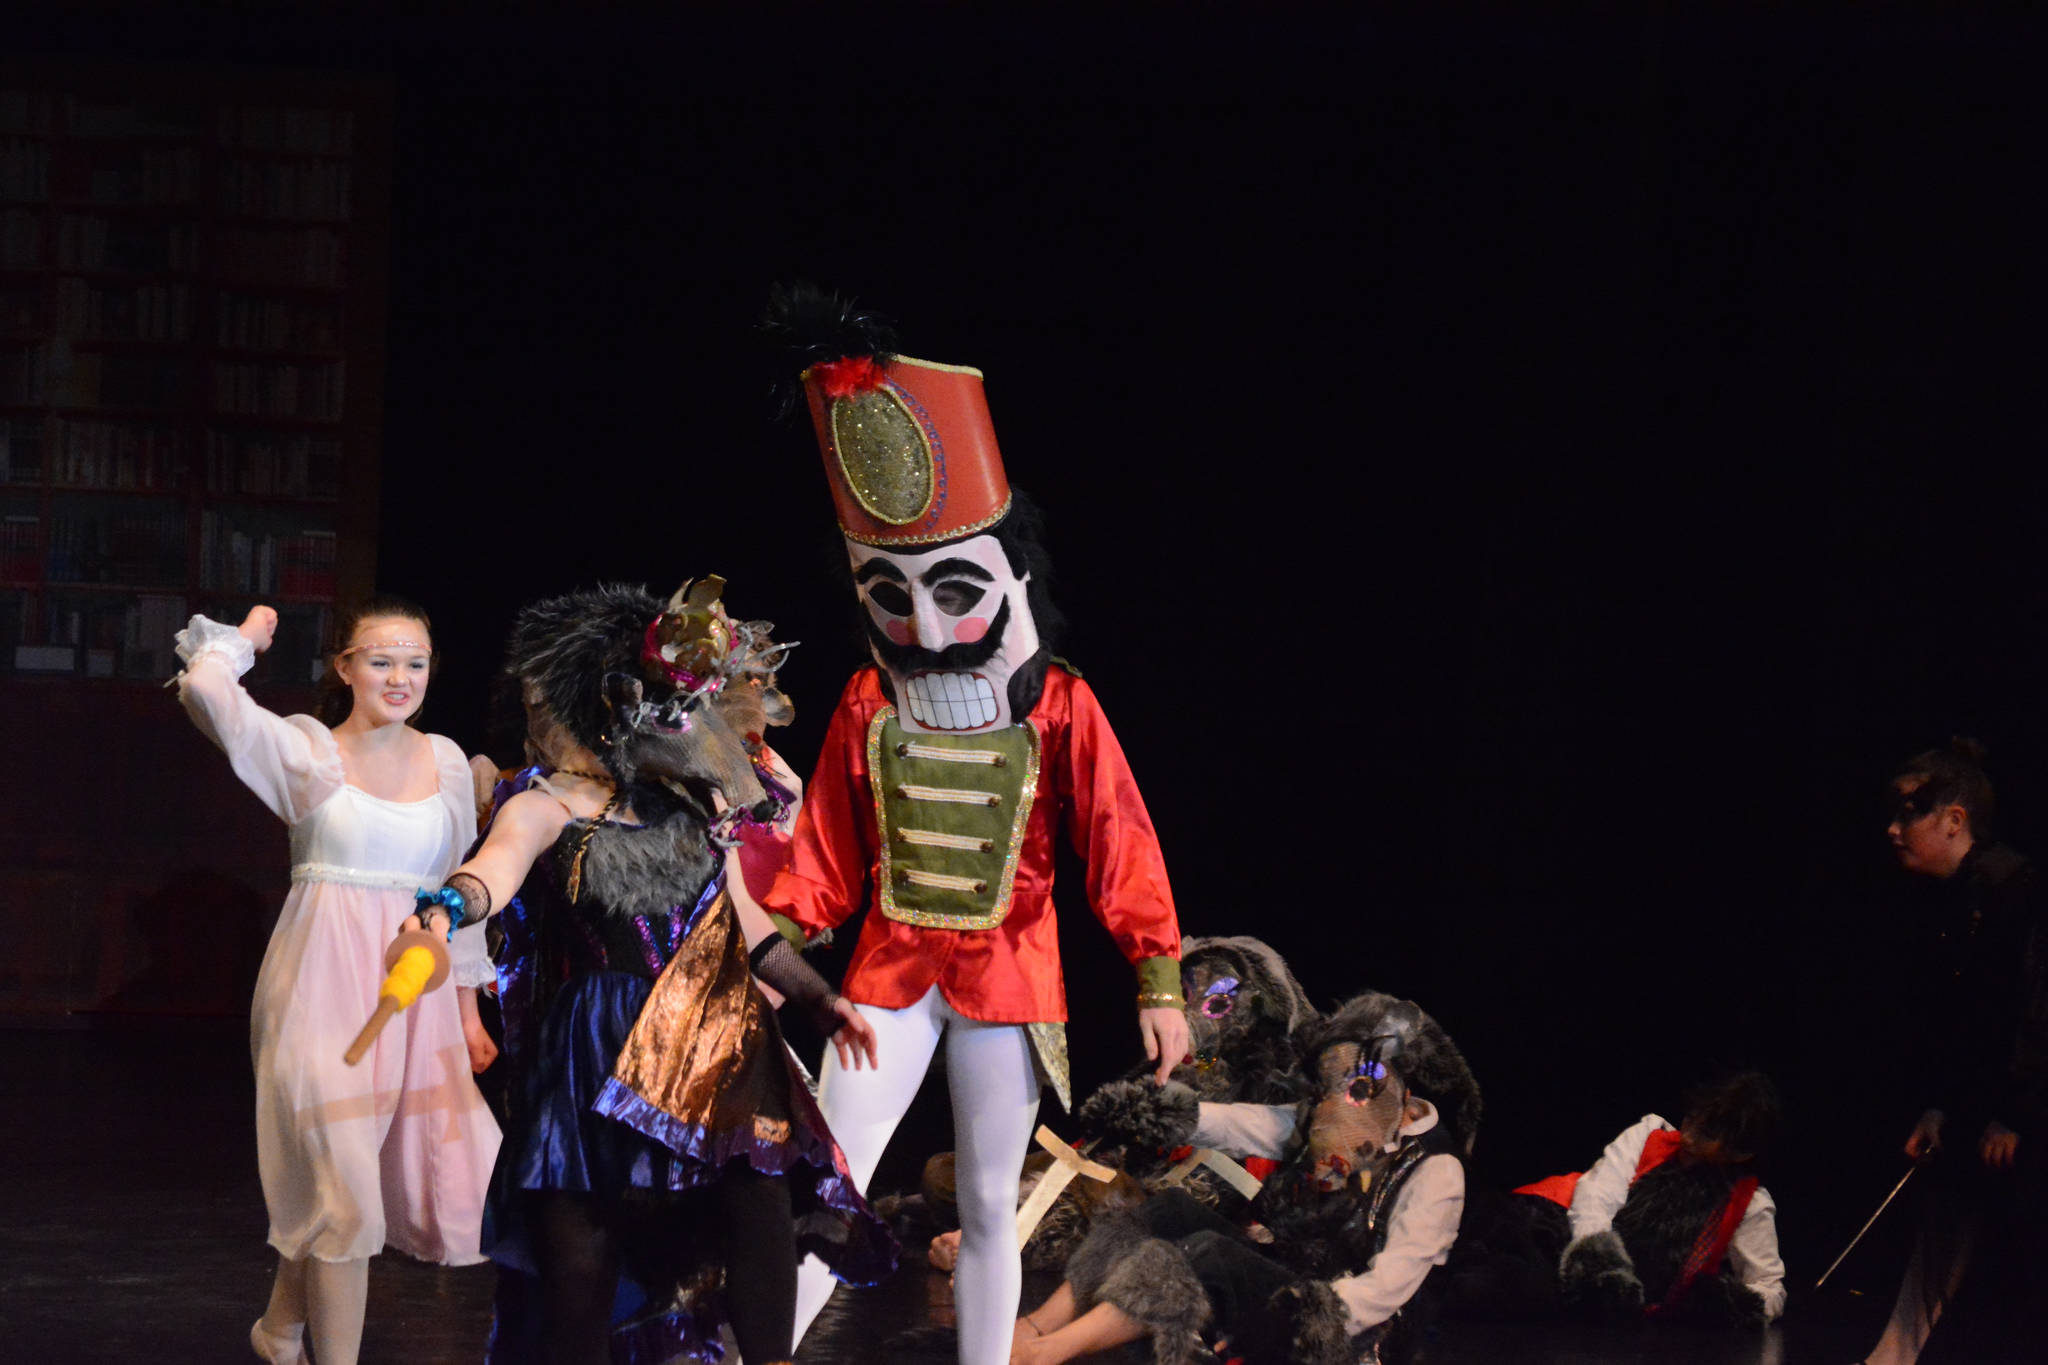 Daisy Kettle as the Queen Rat battles the Liam James as the Battler Nutcracker in a scene from a rehearsal of the Homer production of the Nutcracker Ballet on Nov. 25, 2018, at the Mariner Theatre in Homer, Alaska. (Photo by Michael Armstrong/Homer News)